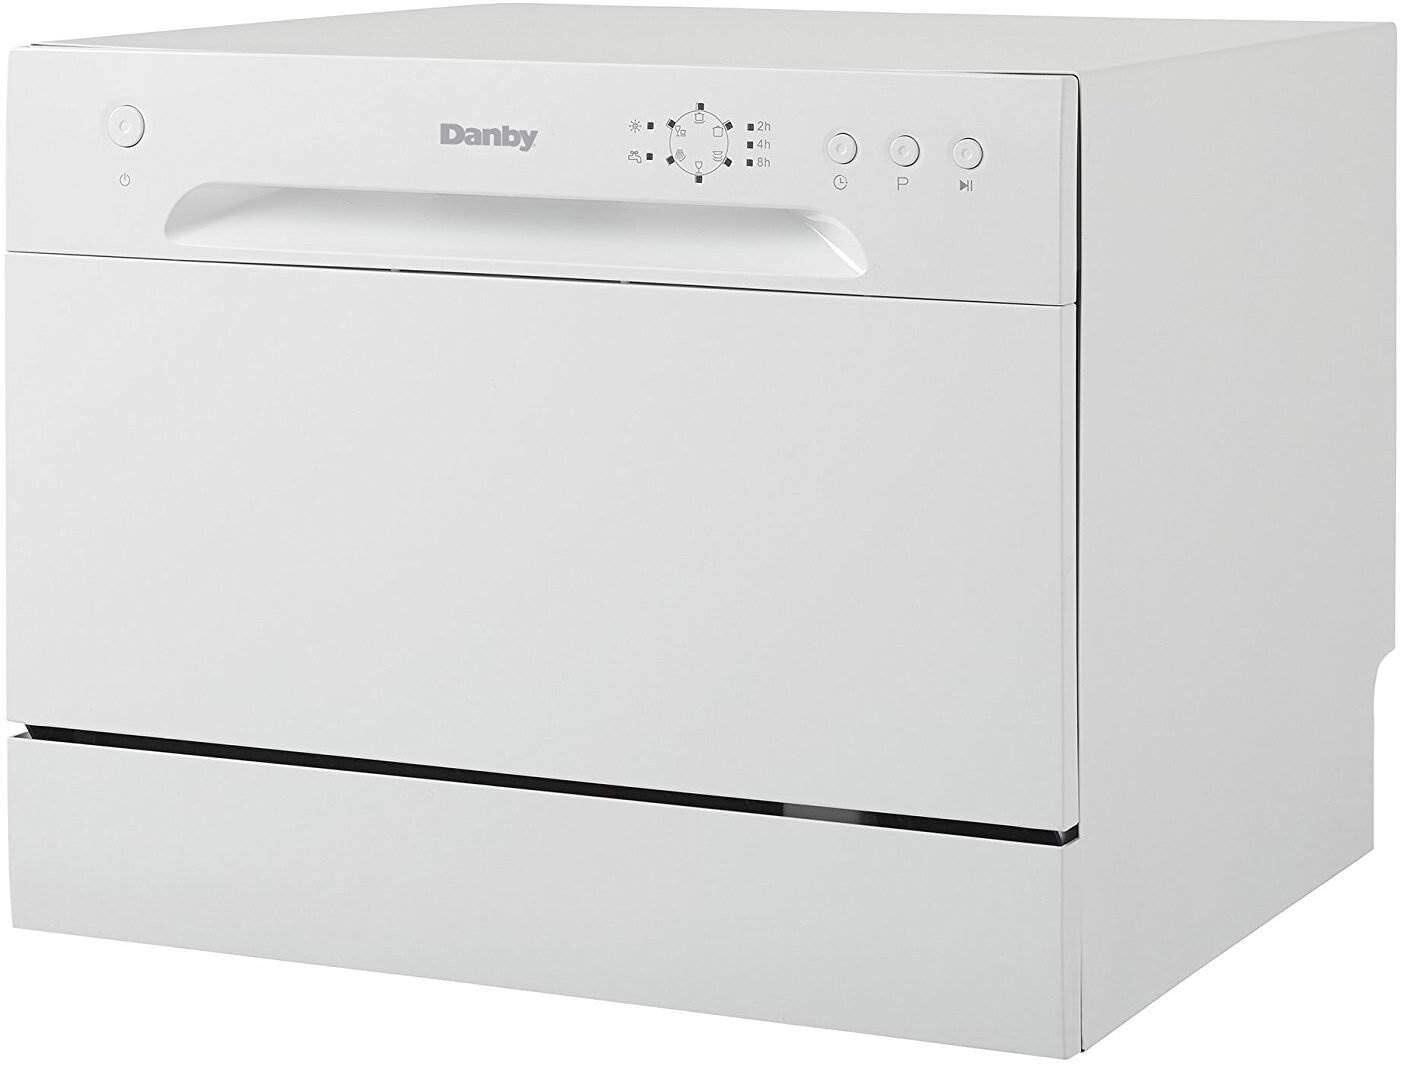 Danby DDW621WDB Countertop Dishwasher with 6 Place